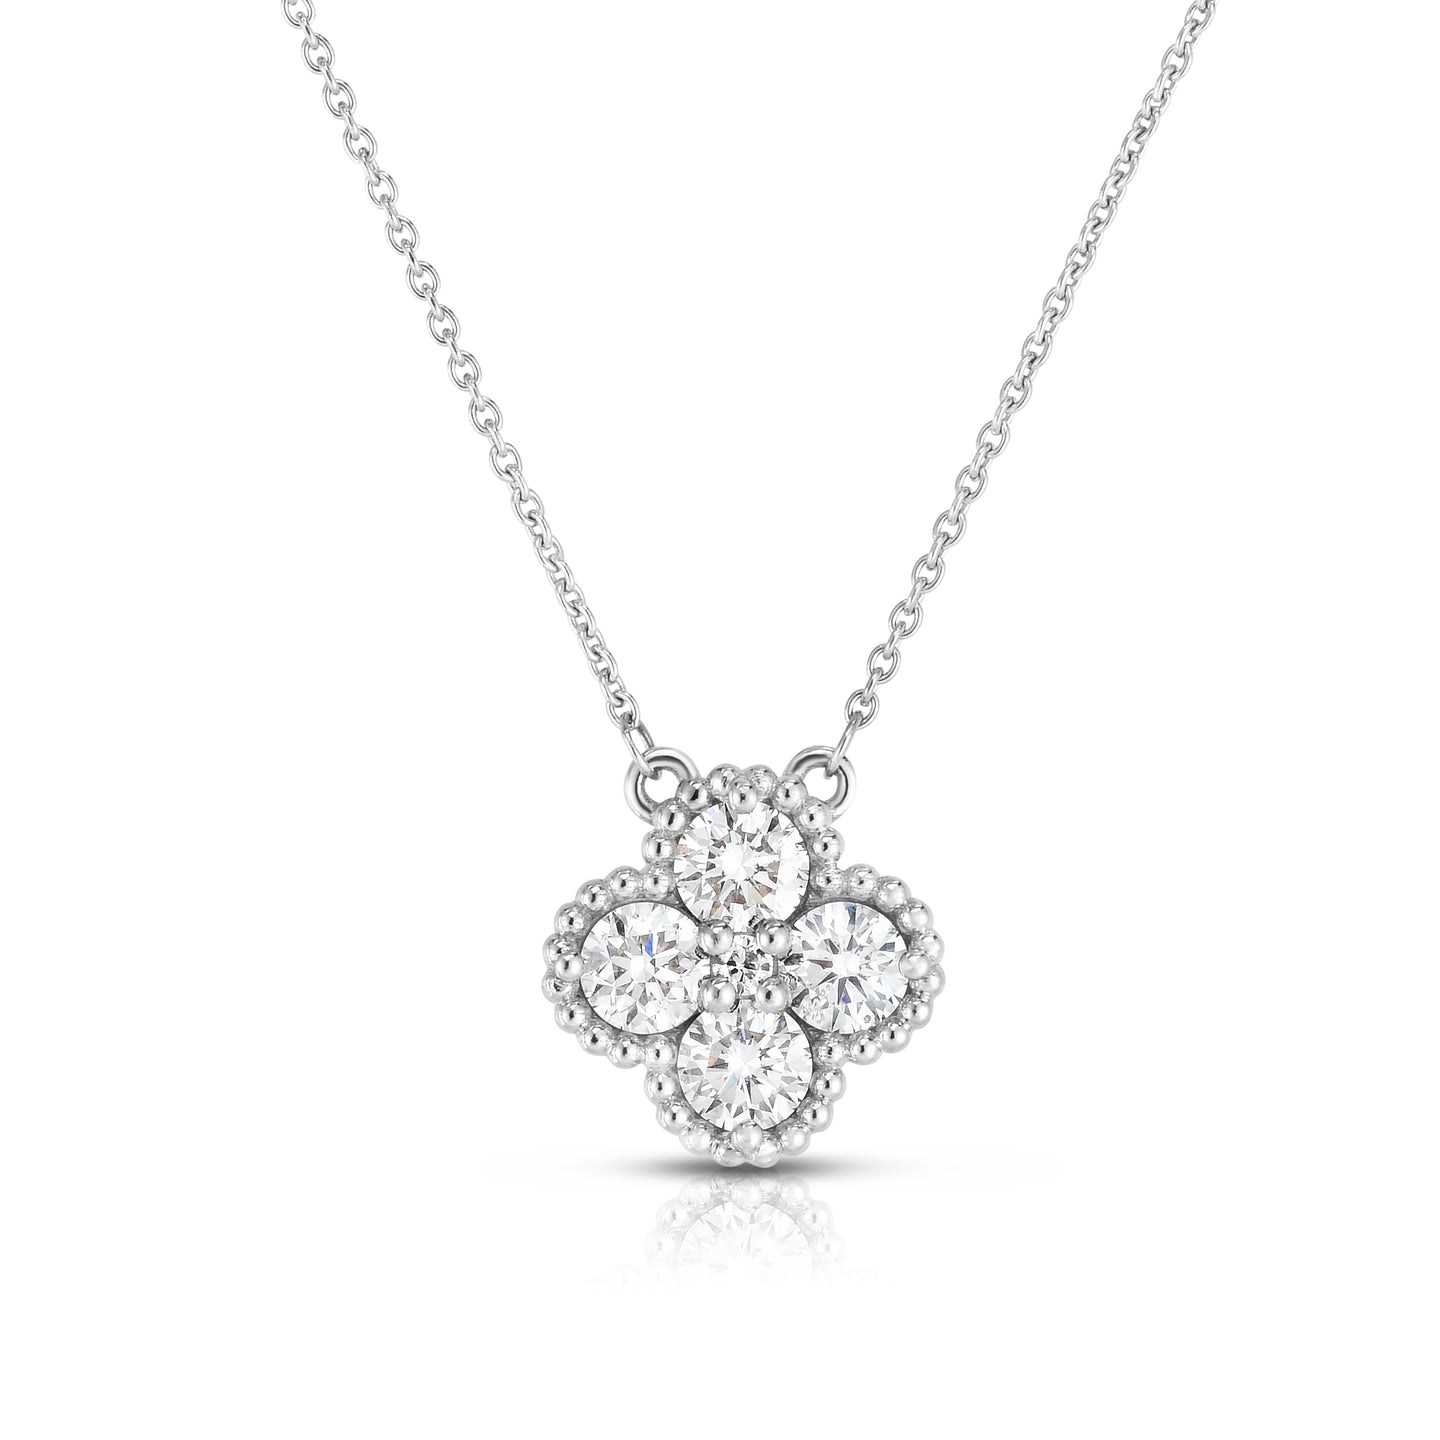 Sabel Collection 14K White Gold Round Diamond Clover Necklace with Milgrain Accents